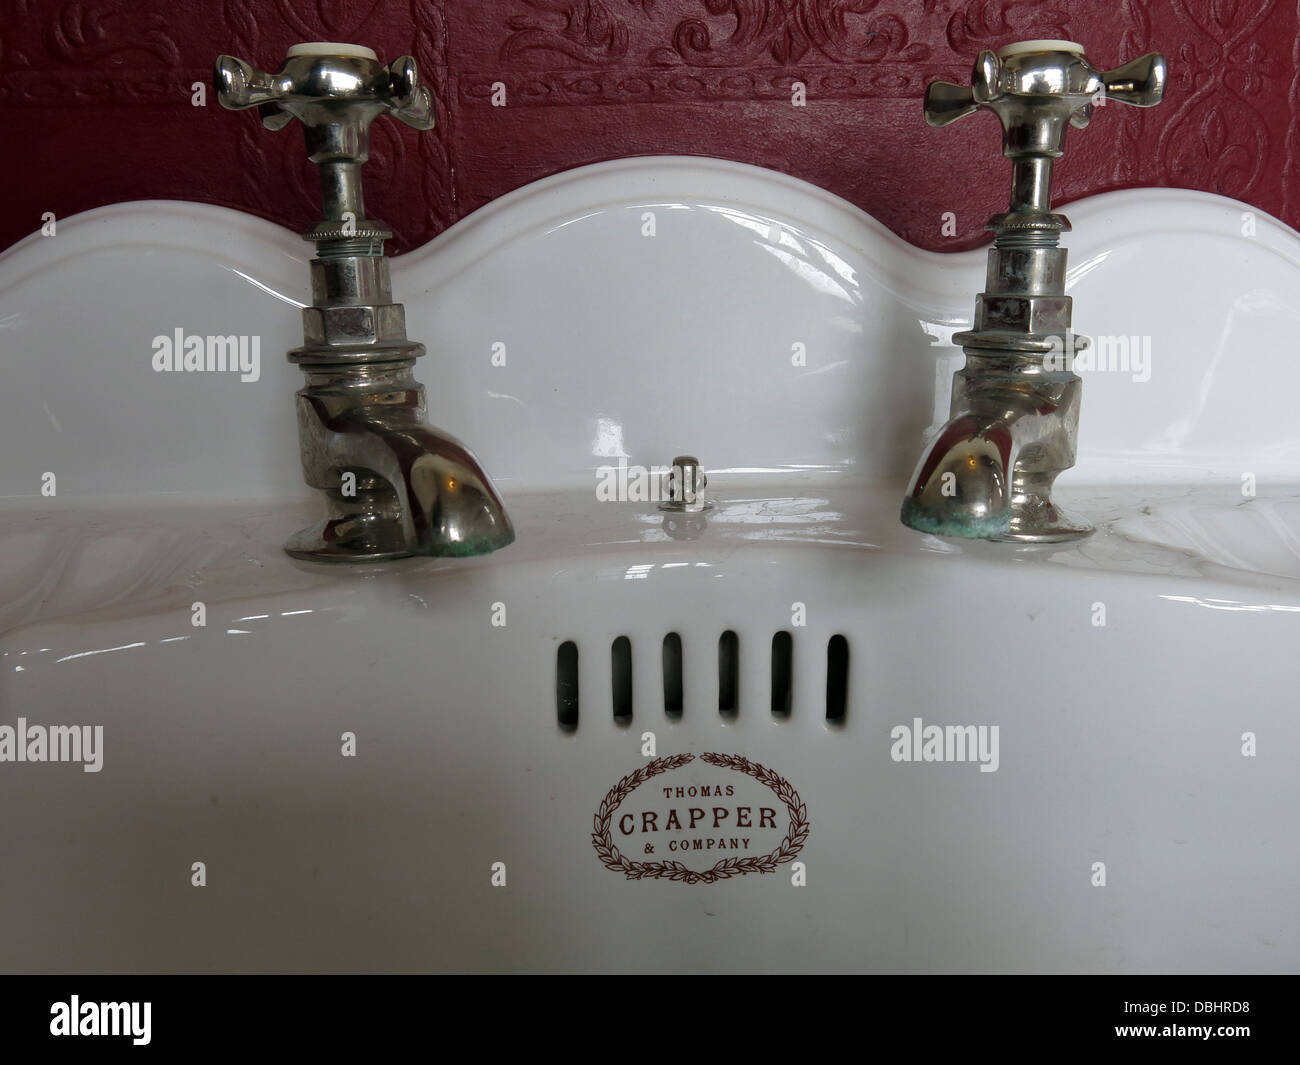 Crapper sink from Longton Stoke-On-Trent Great Britain showing potteries heritage at the Gladstone Pottery Museum Stock Photo